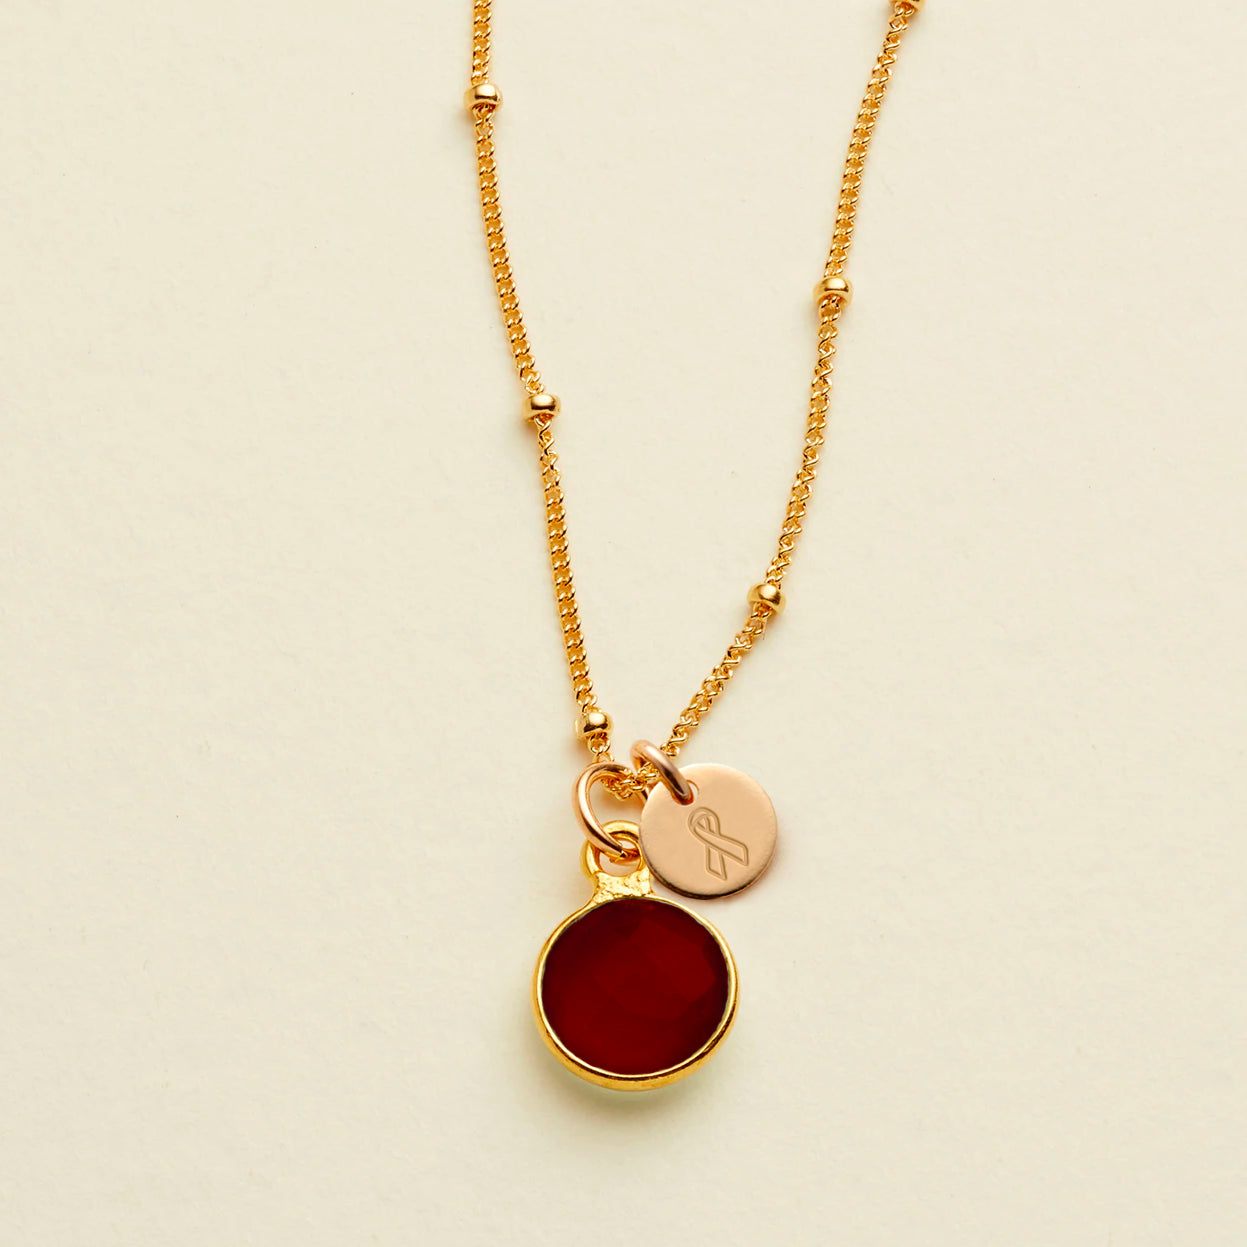 Cancer Awareness Necklace Gold Filled / Multiple Myeloma Necklace